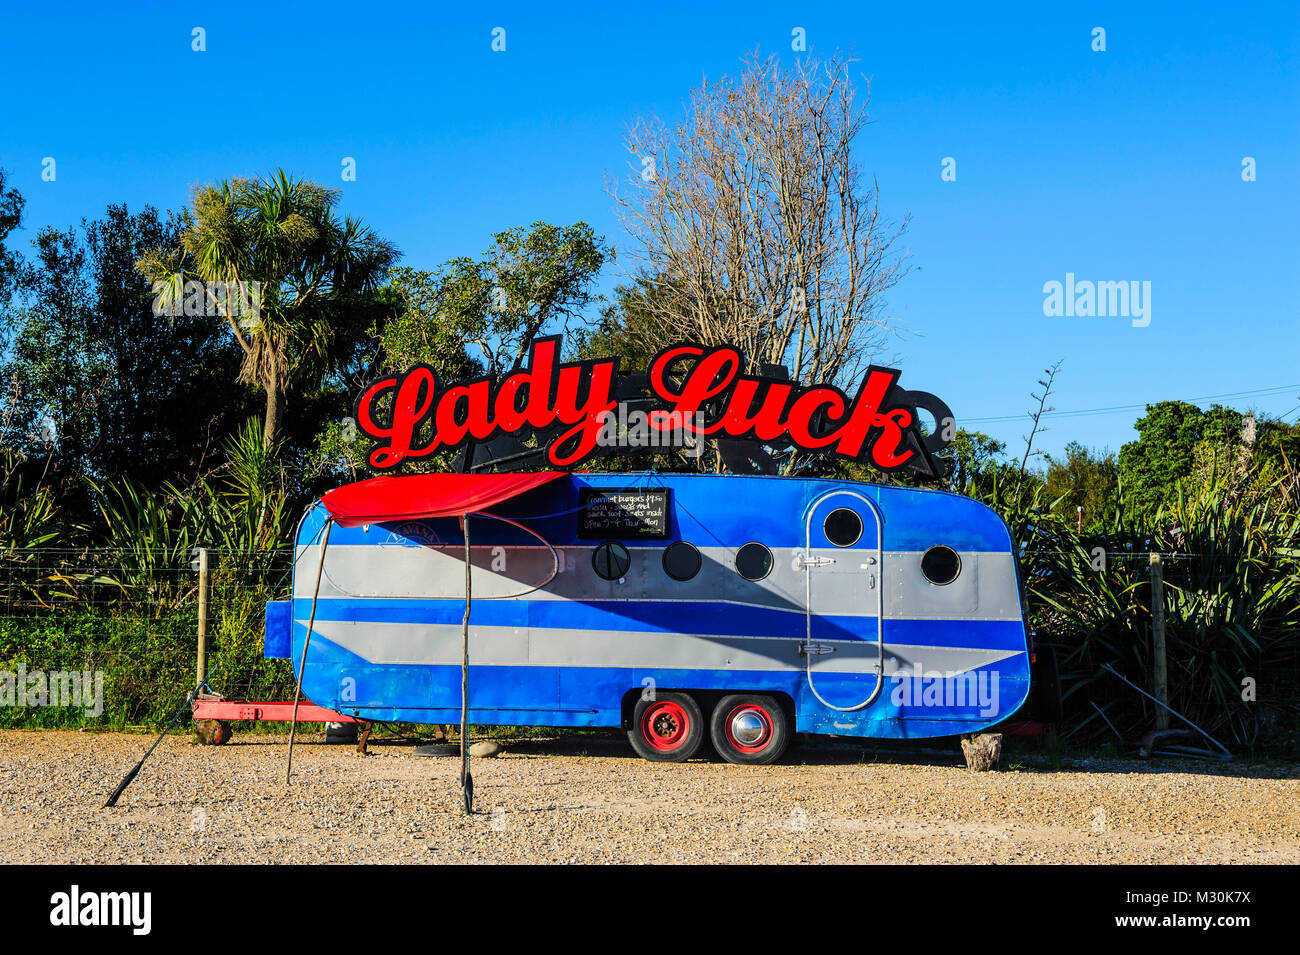 Colourful trailer as a snackstore, Aorere river, Collingwood, Golden Bay, South Island, New Zealand Stock Photo